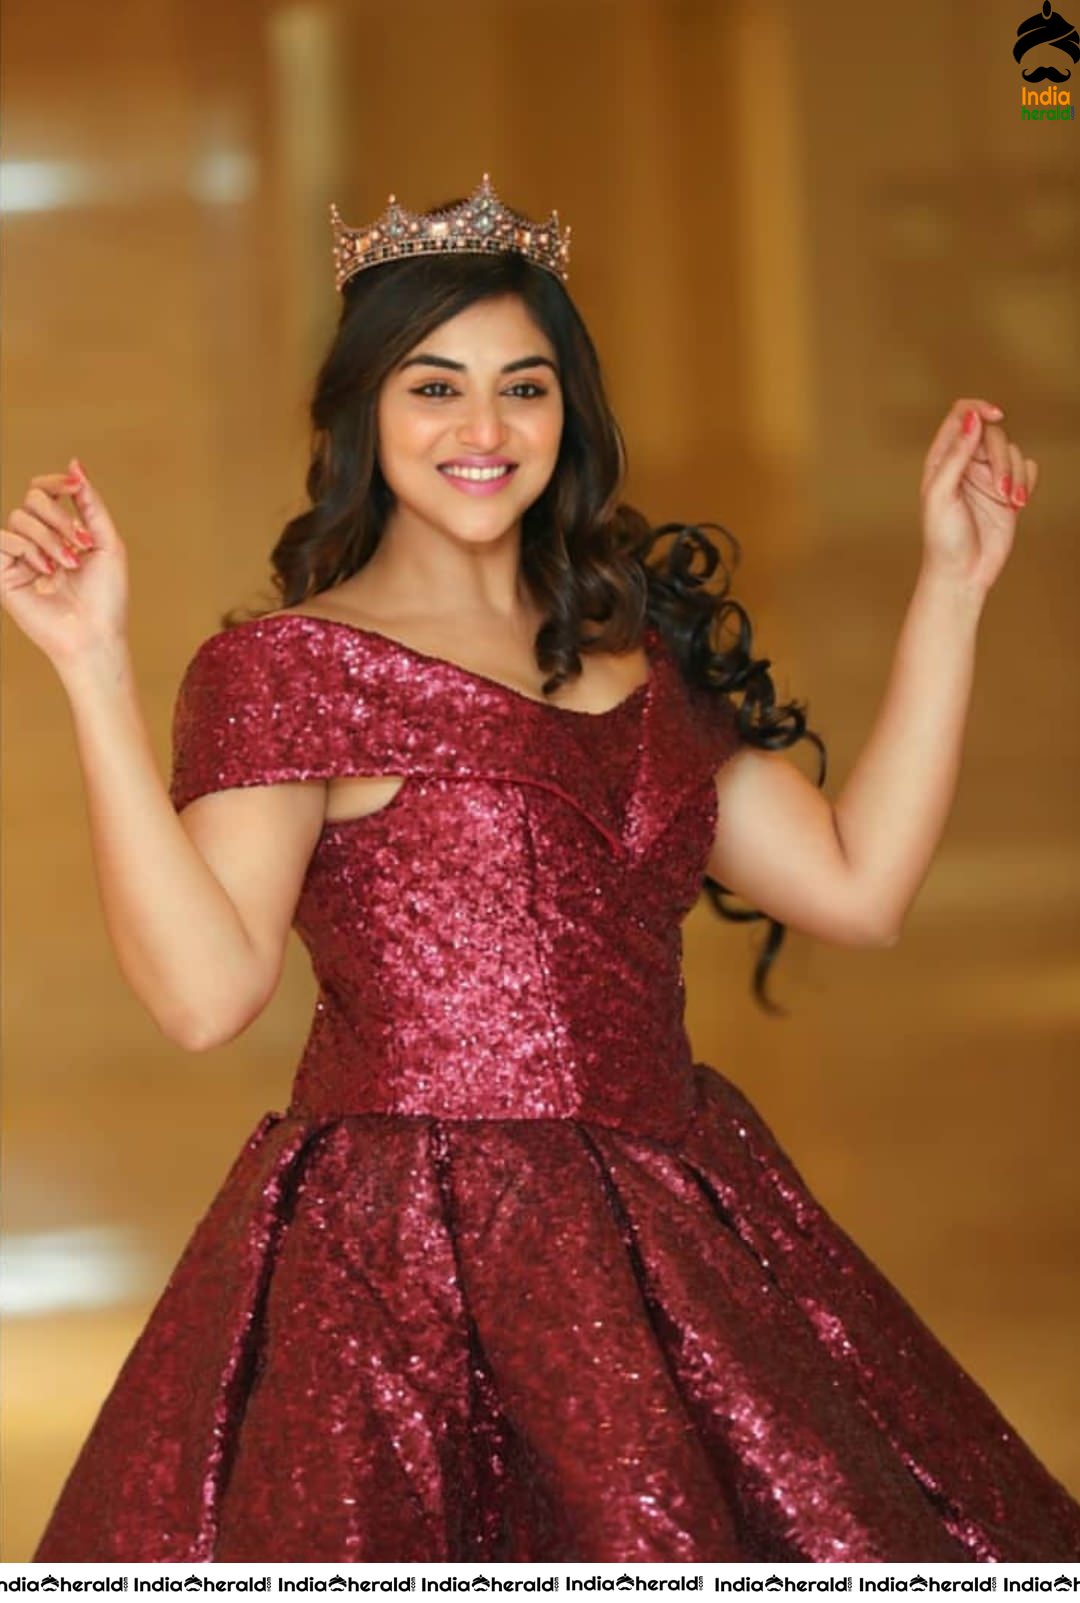 Latest Stills of Indhuja dressed as a Princess